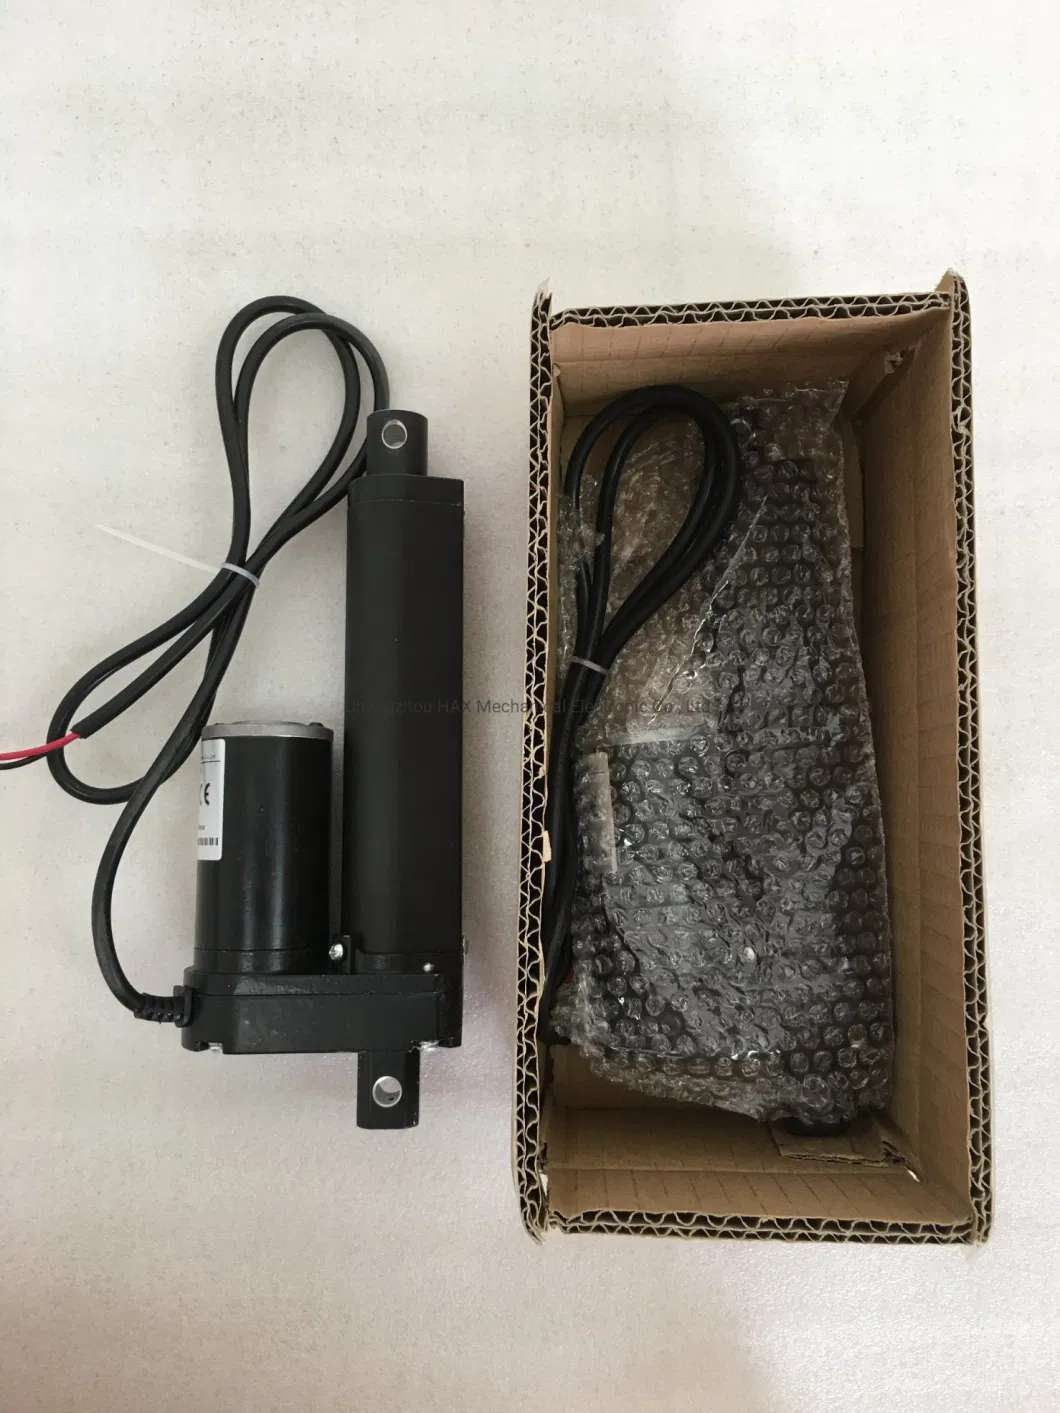 Pneumatic Linear Actuator Potentio Meter Heavy Load 2000n with DC Motor From Hax Manufacturer China